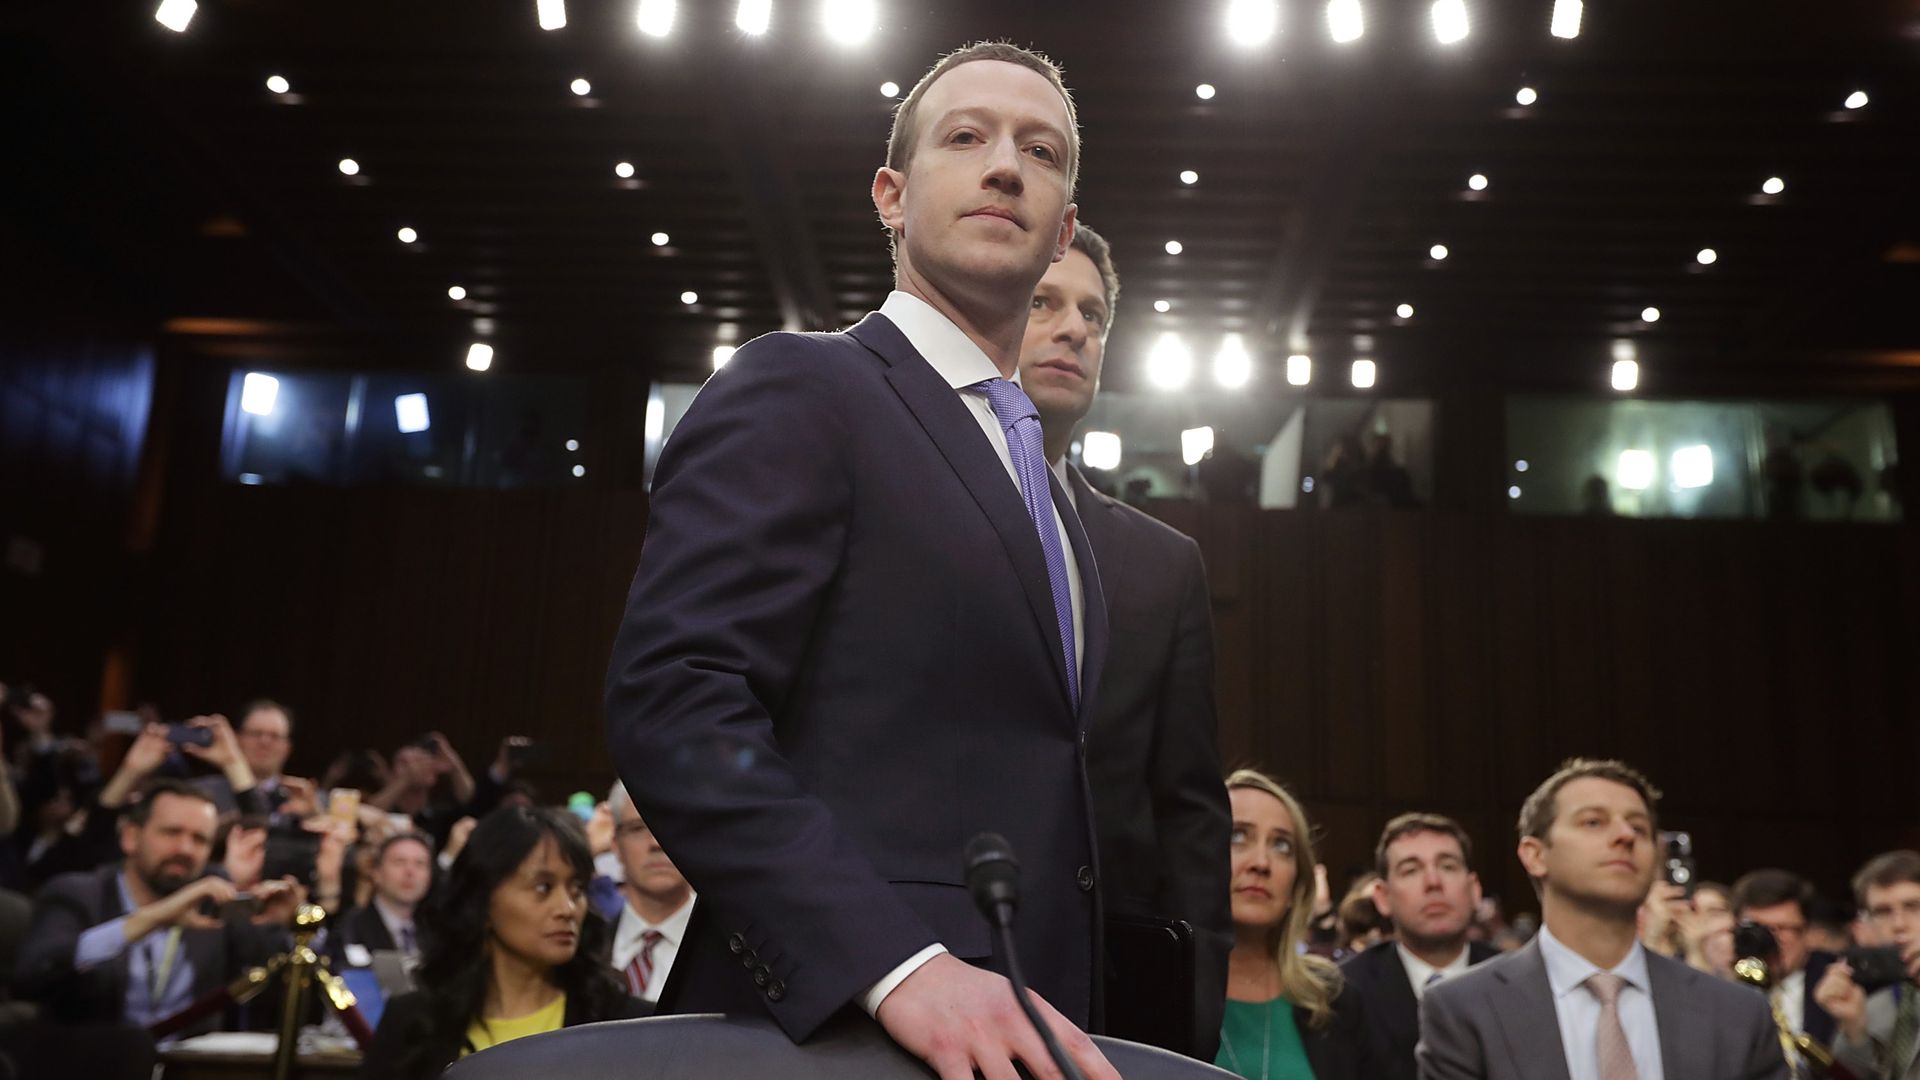 Mark Zuckerberg stands with his hand on a chair